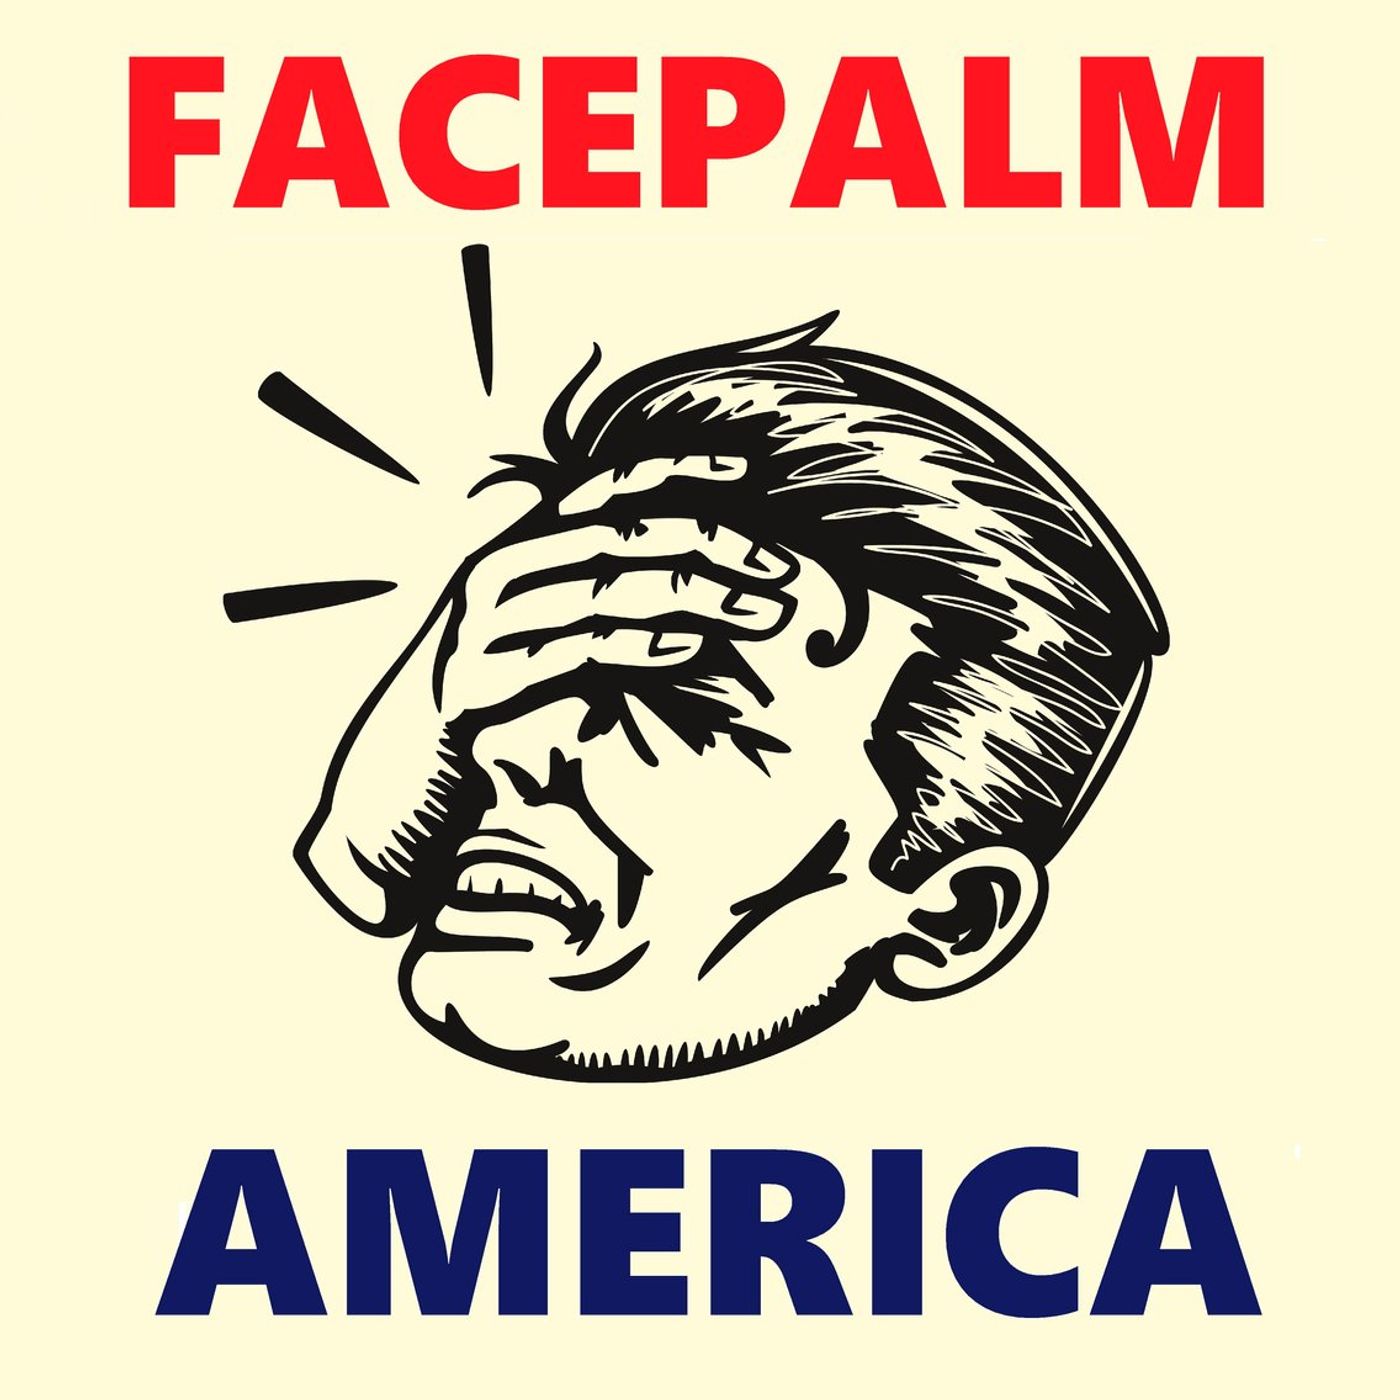 Facepalm America: The GOP Is Backing away From the World